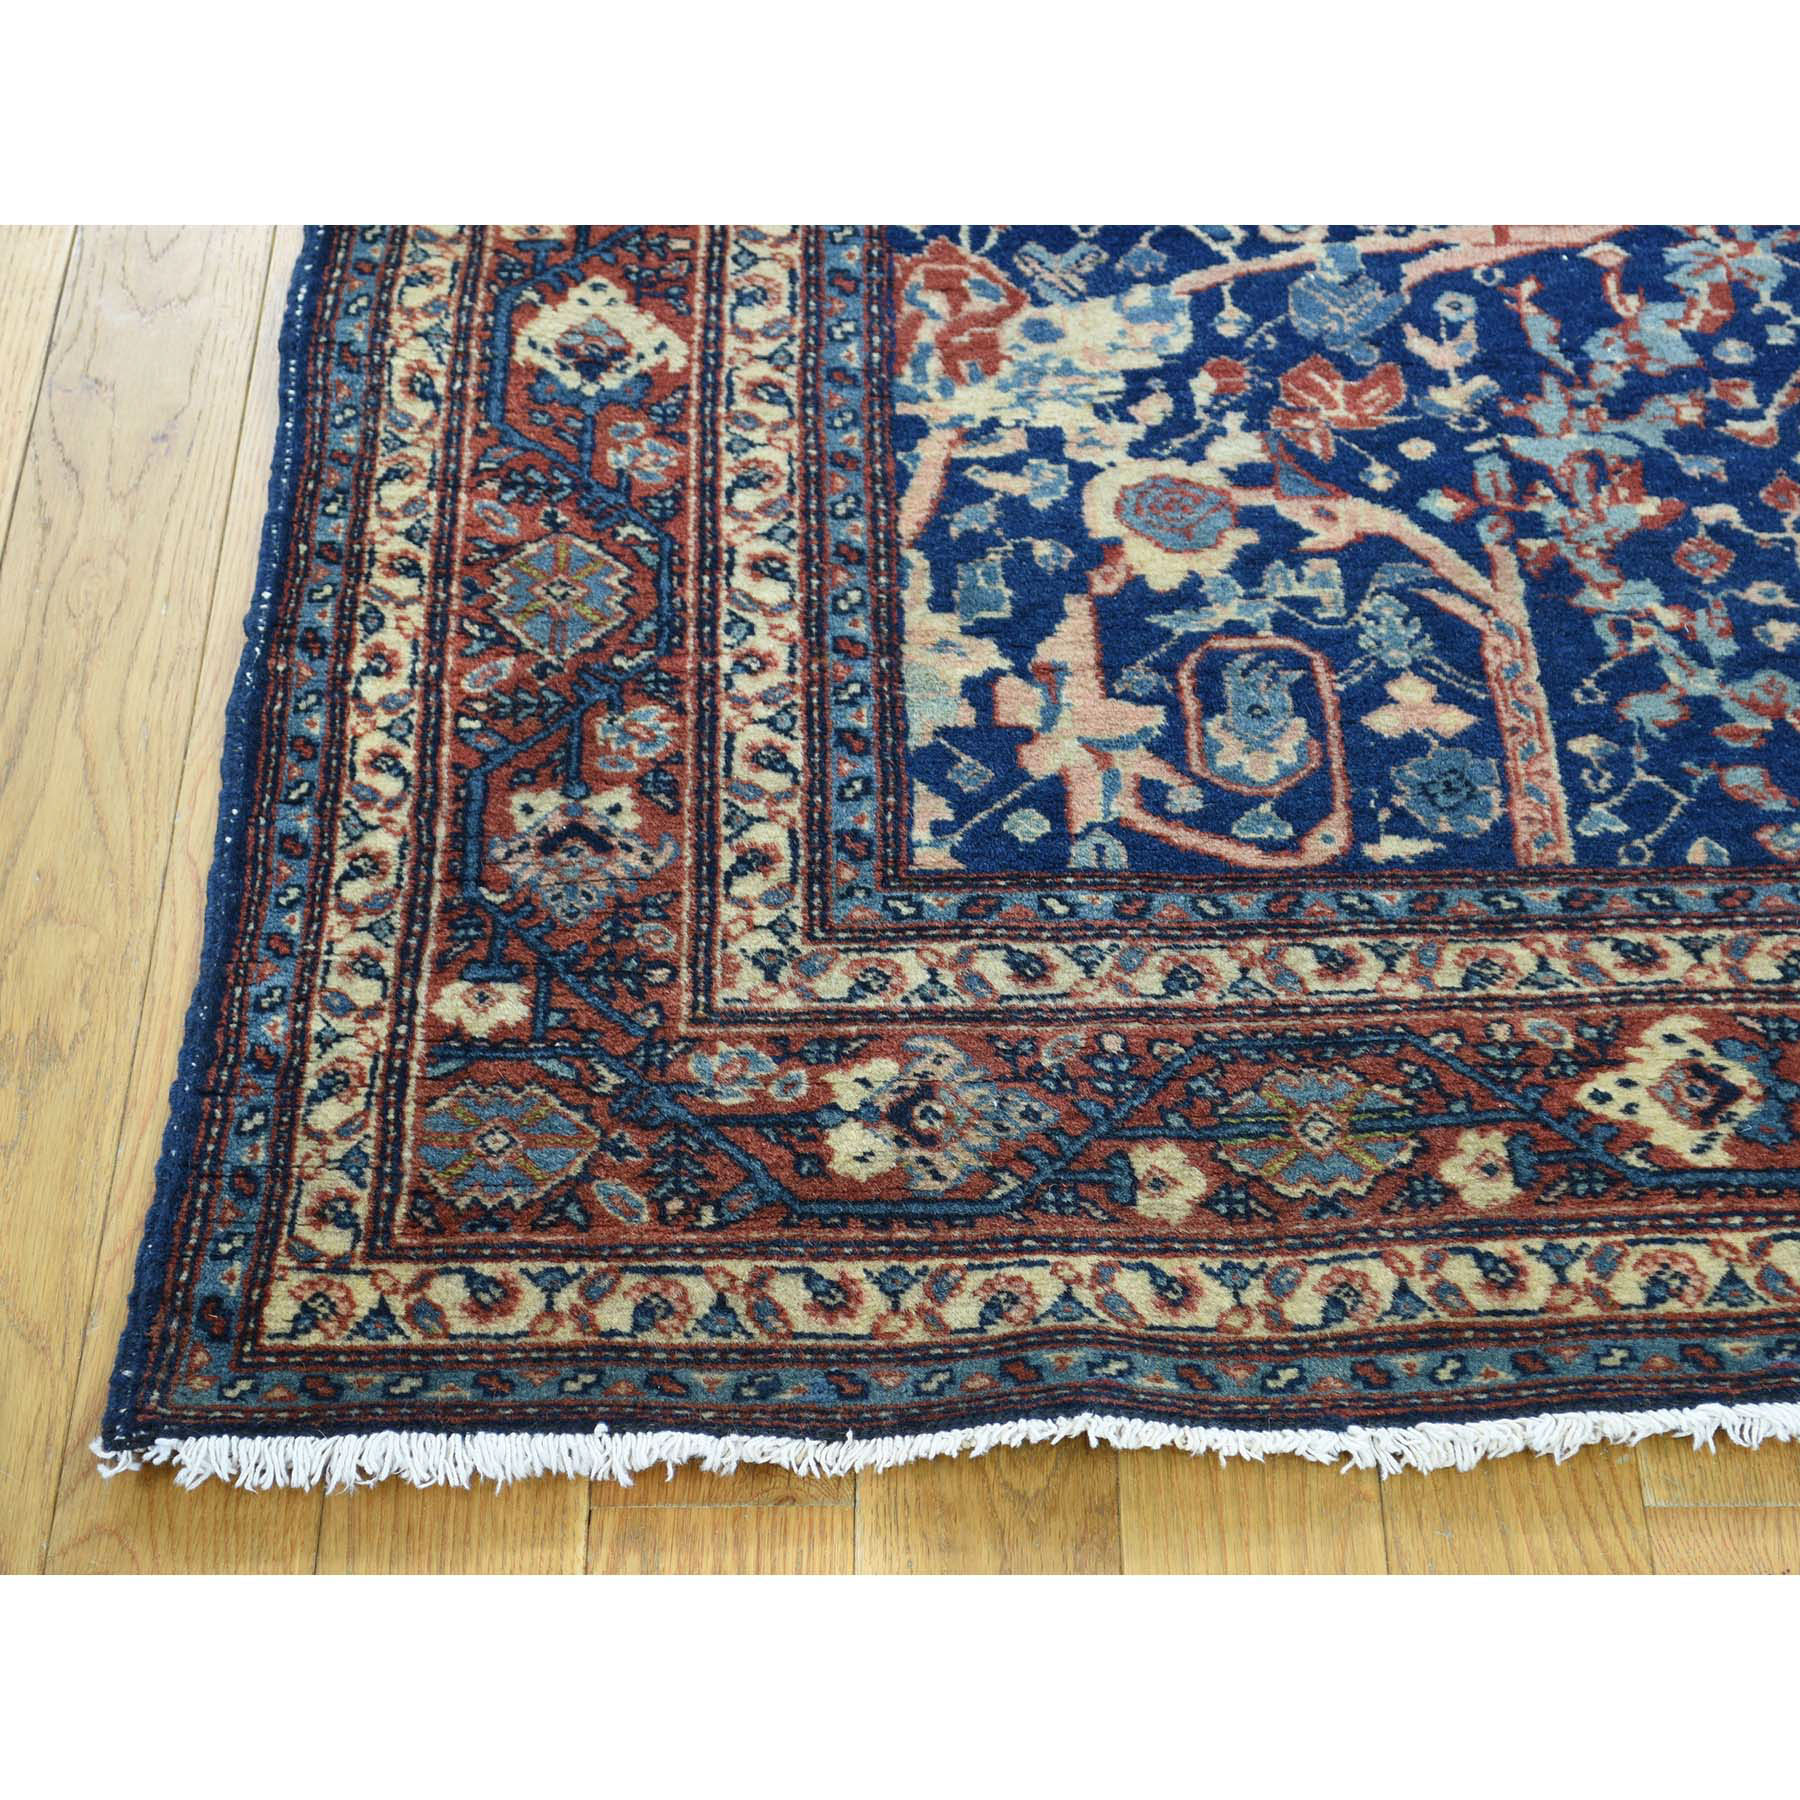 4-6 x6-3  Hand-Knotted Antique Persian Tabriz Navy Blue Full Pile Rug 